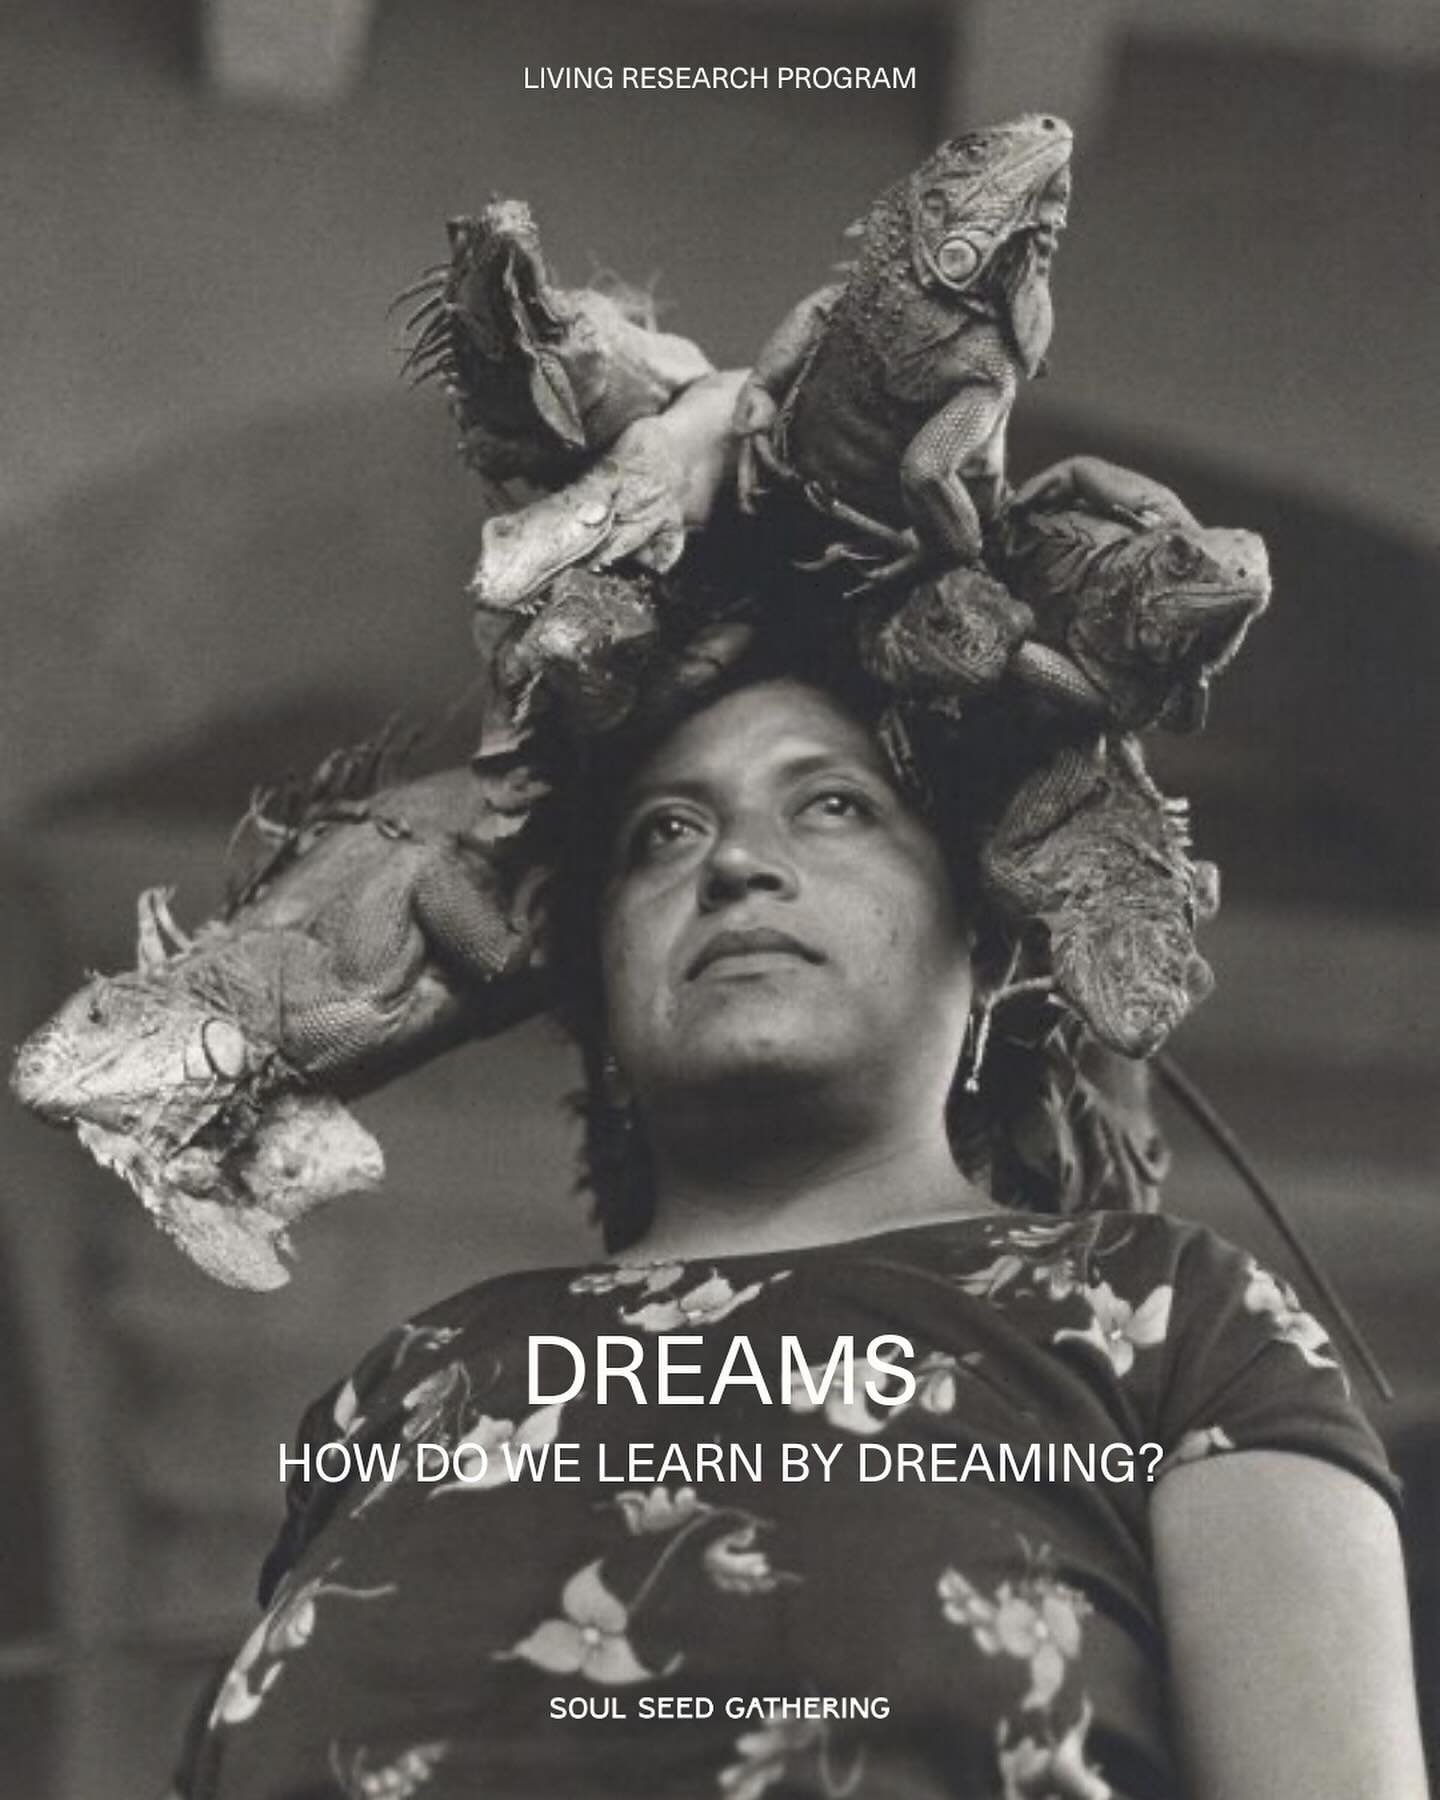 DREAMING
&mdash; how do we research with dreams?

Throughout time, dreams have been an integral, and central, part of earth-based cultures spiritual practices, providing guidance, insight, divination, communication with the &lsquo;more-than-human-wor